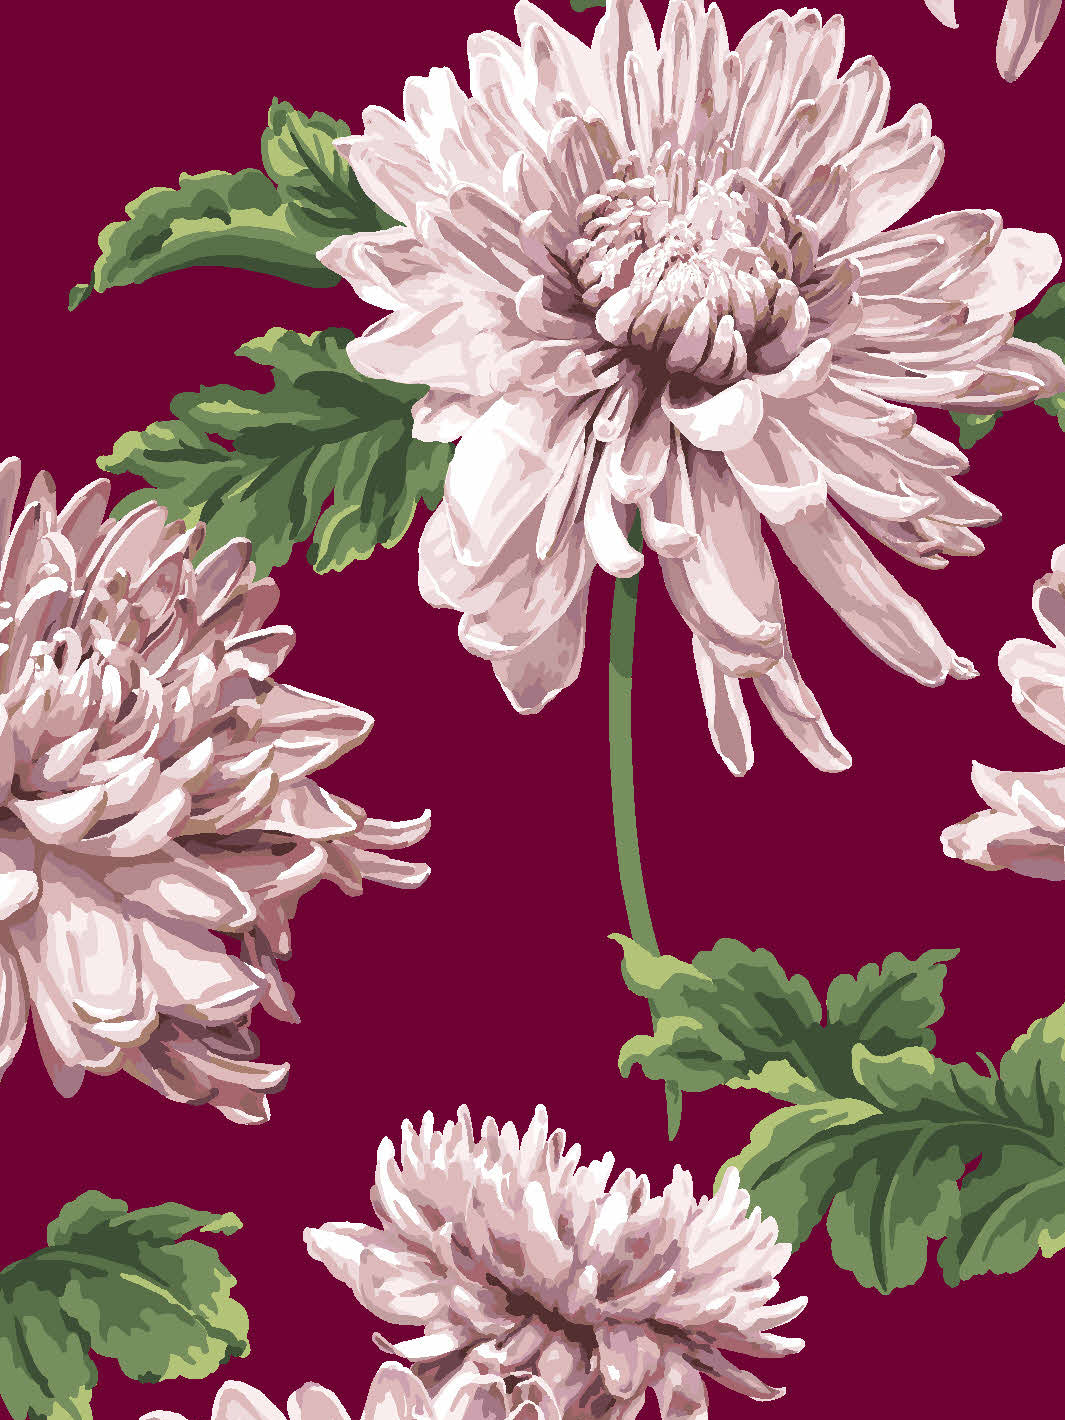 'Mums for Marion Small' Wallpaper by Sarah Jessica Parker - Claret